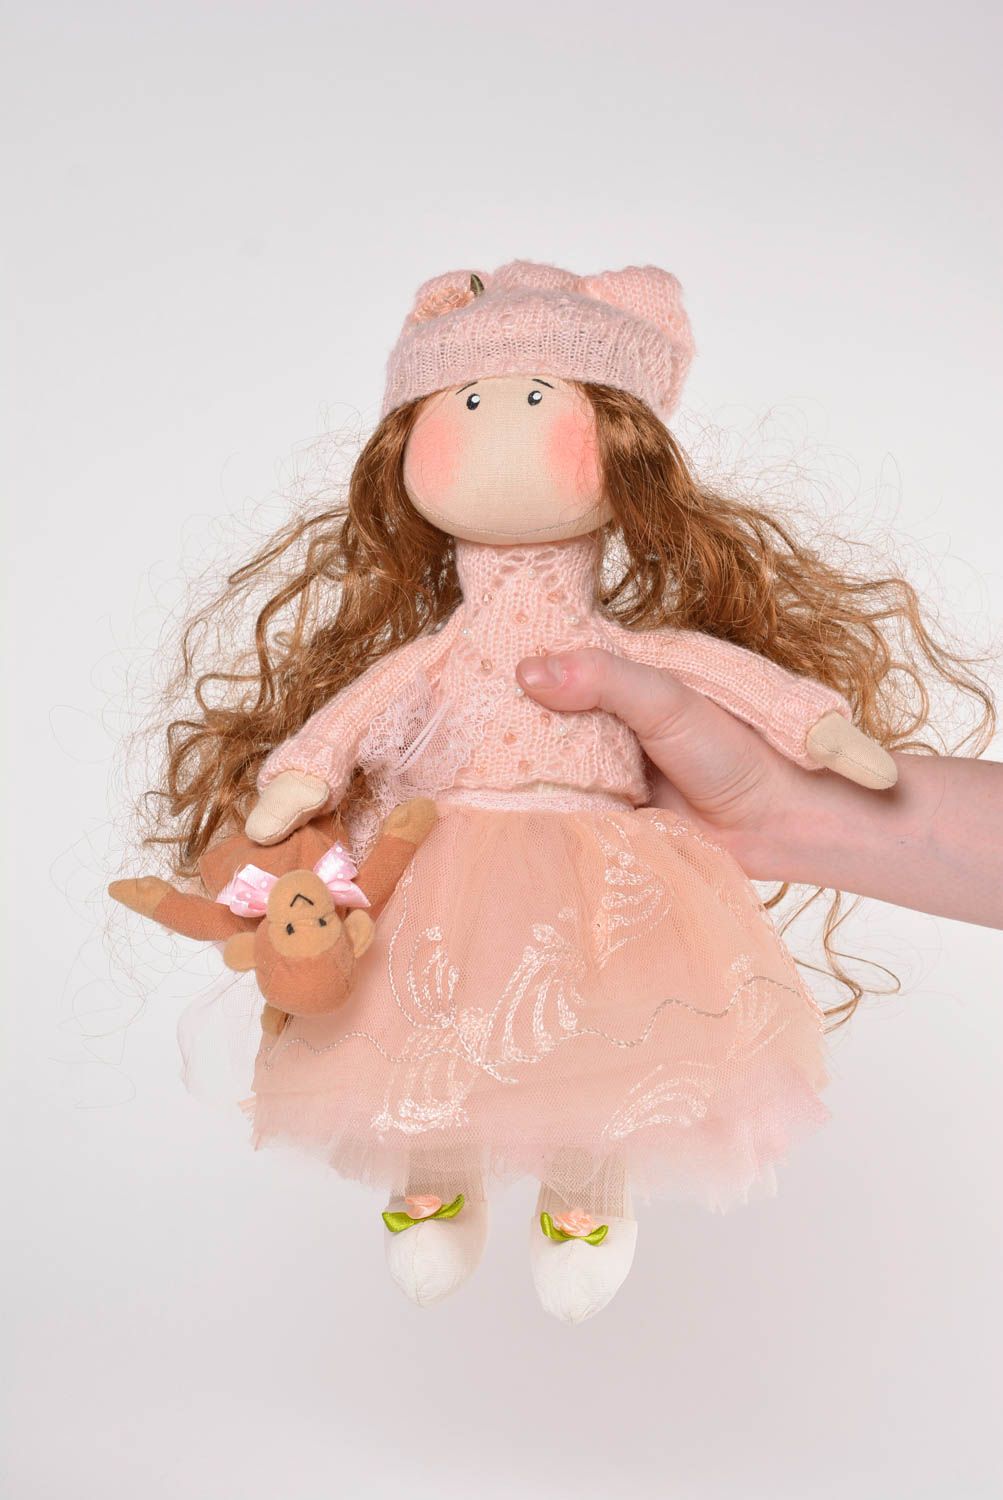 Beautiful handmade rag doll best toys for kids stuffed soft toy home design photo 2